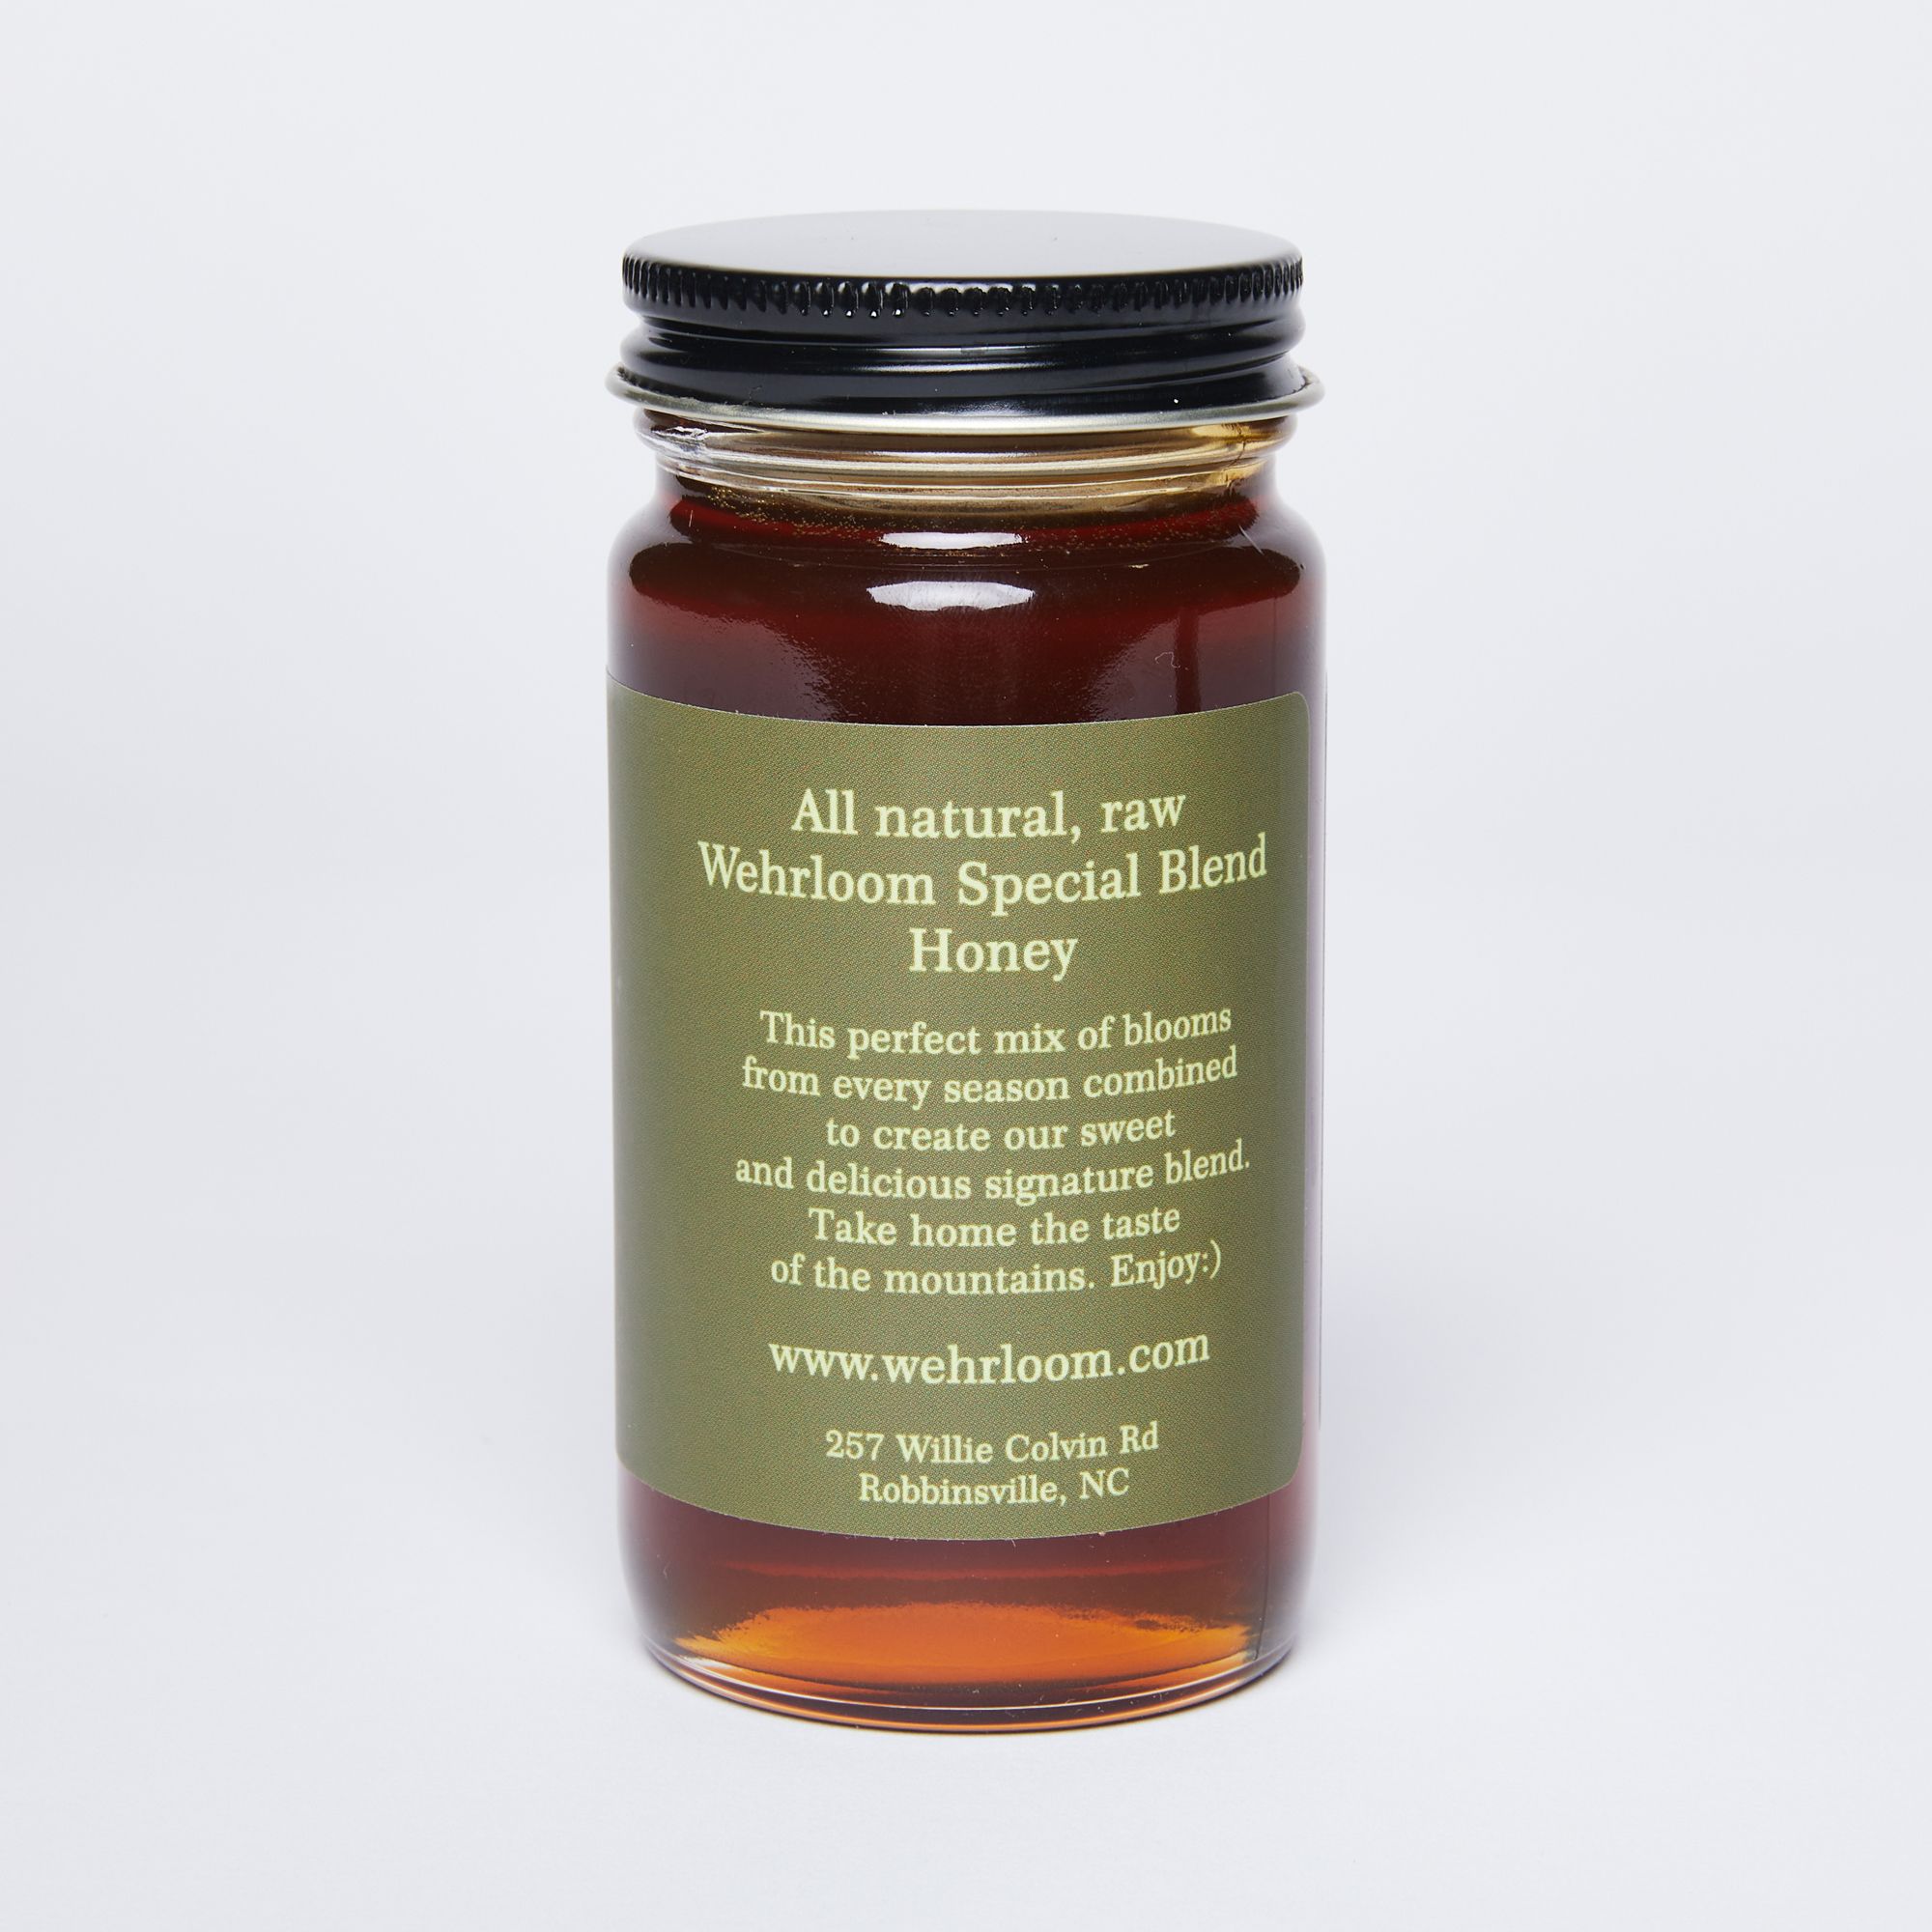 Glass jar filled with golden honey with a black lid and back of green label that reads 'All natural, raw, wherloom special blend honey''.